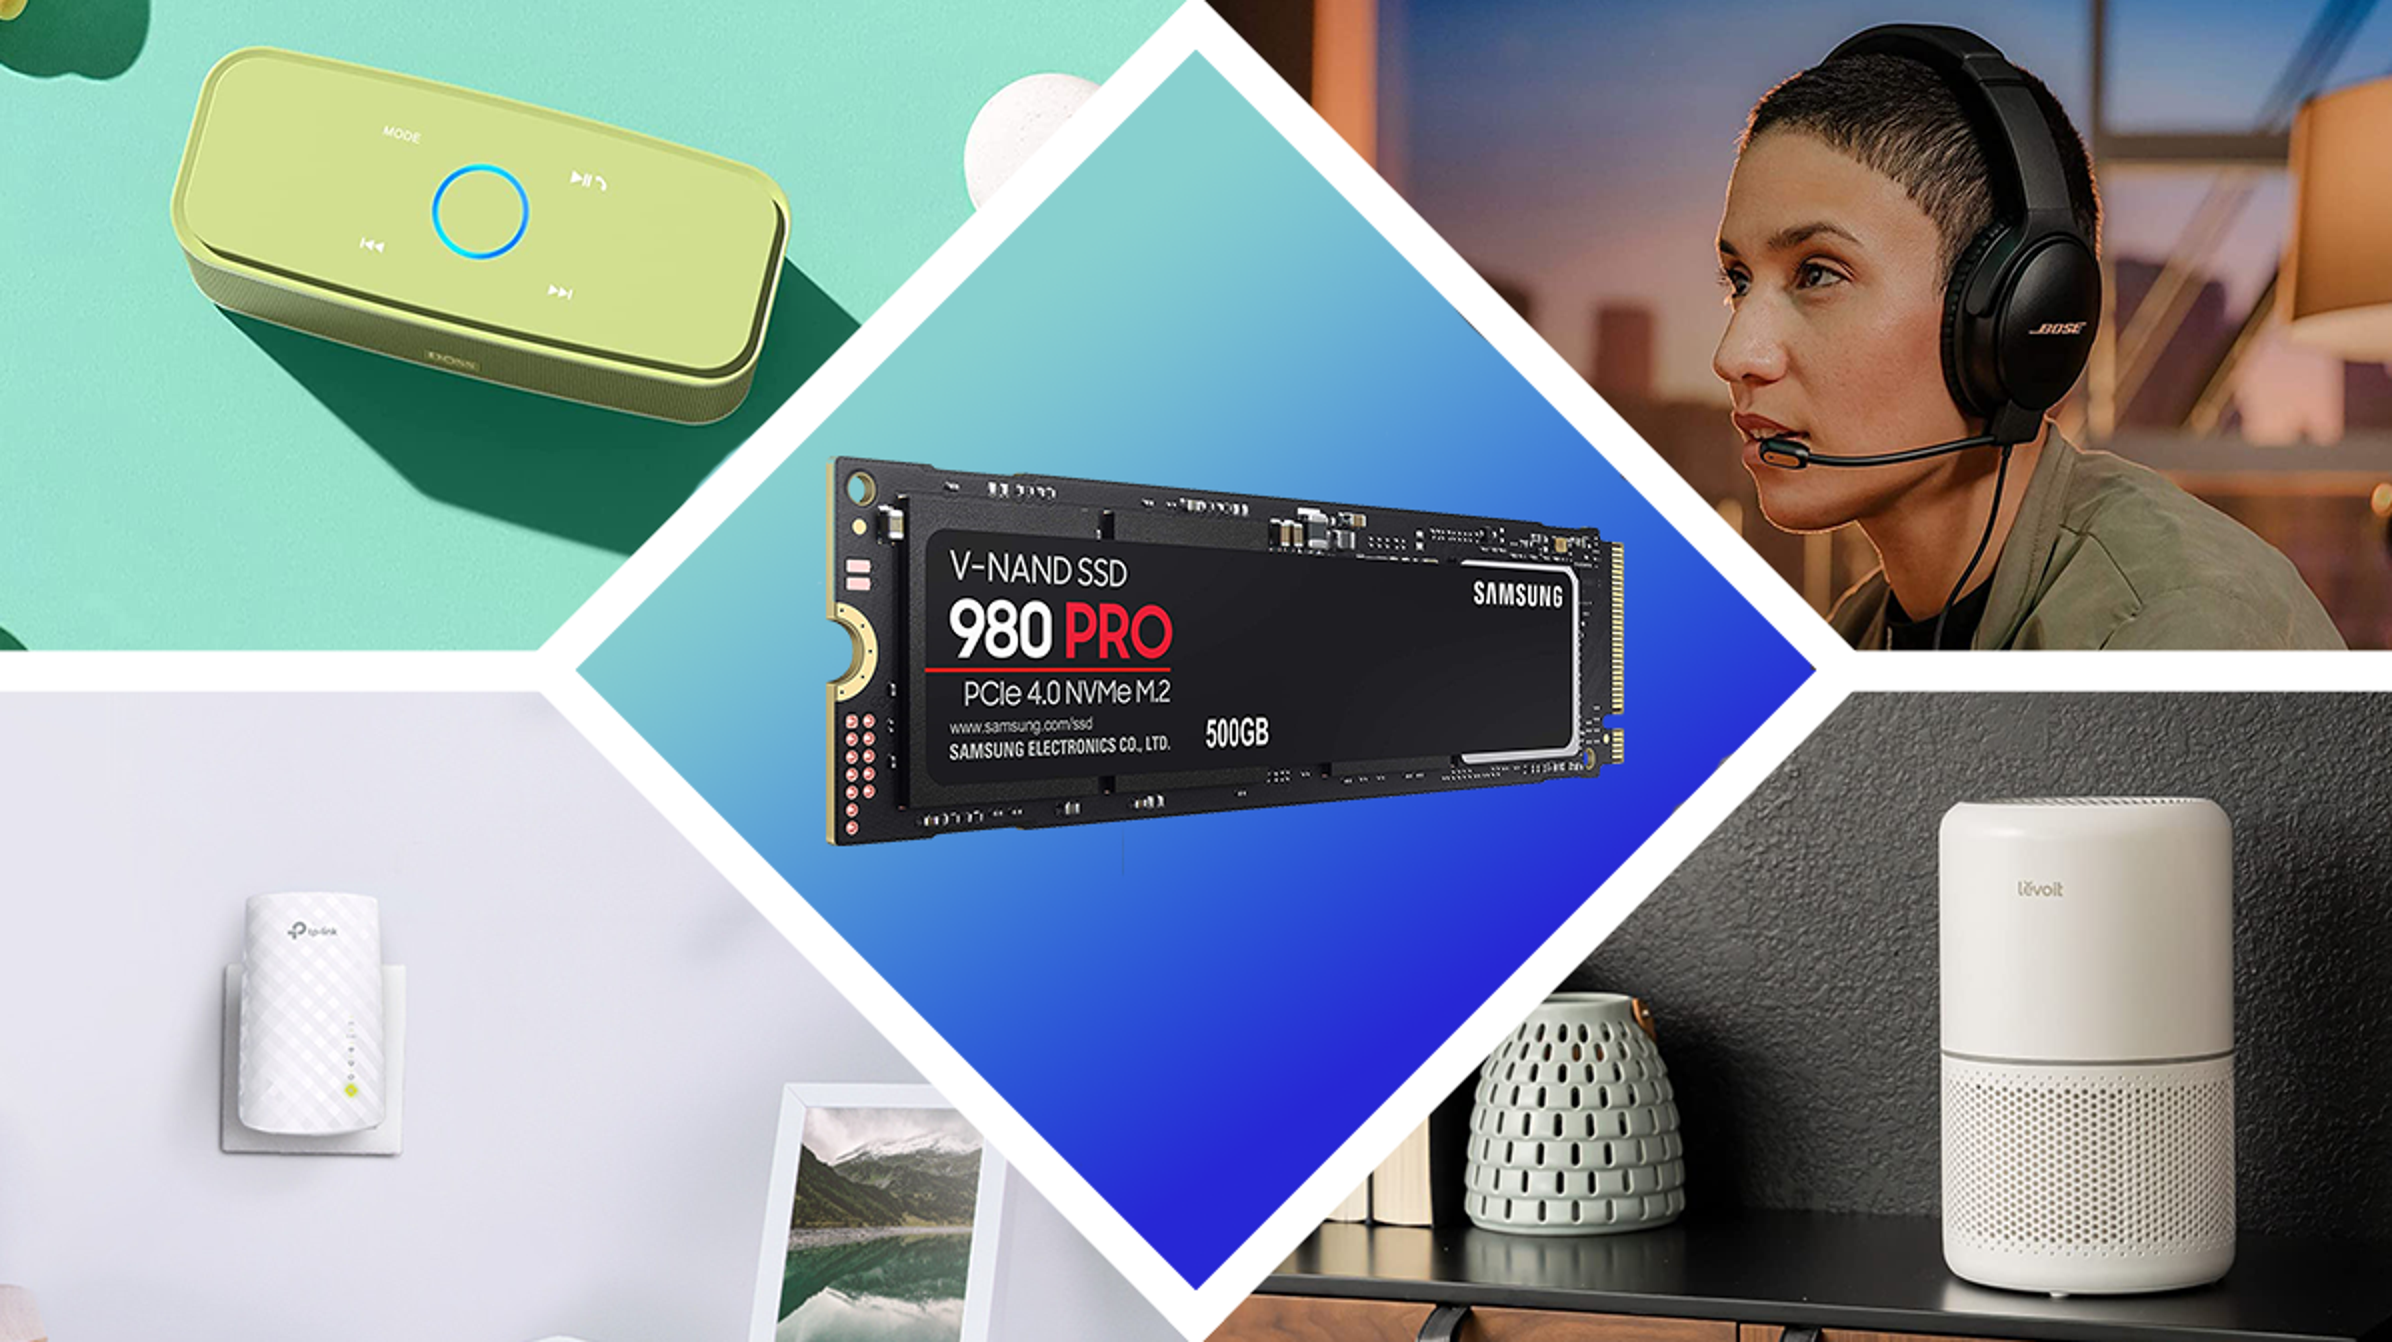 HTG Deals: Get a Great Samsung SSD for $84.99 and More